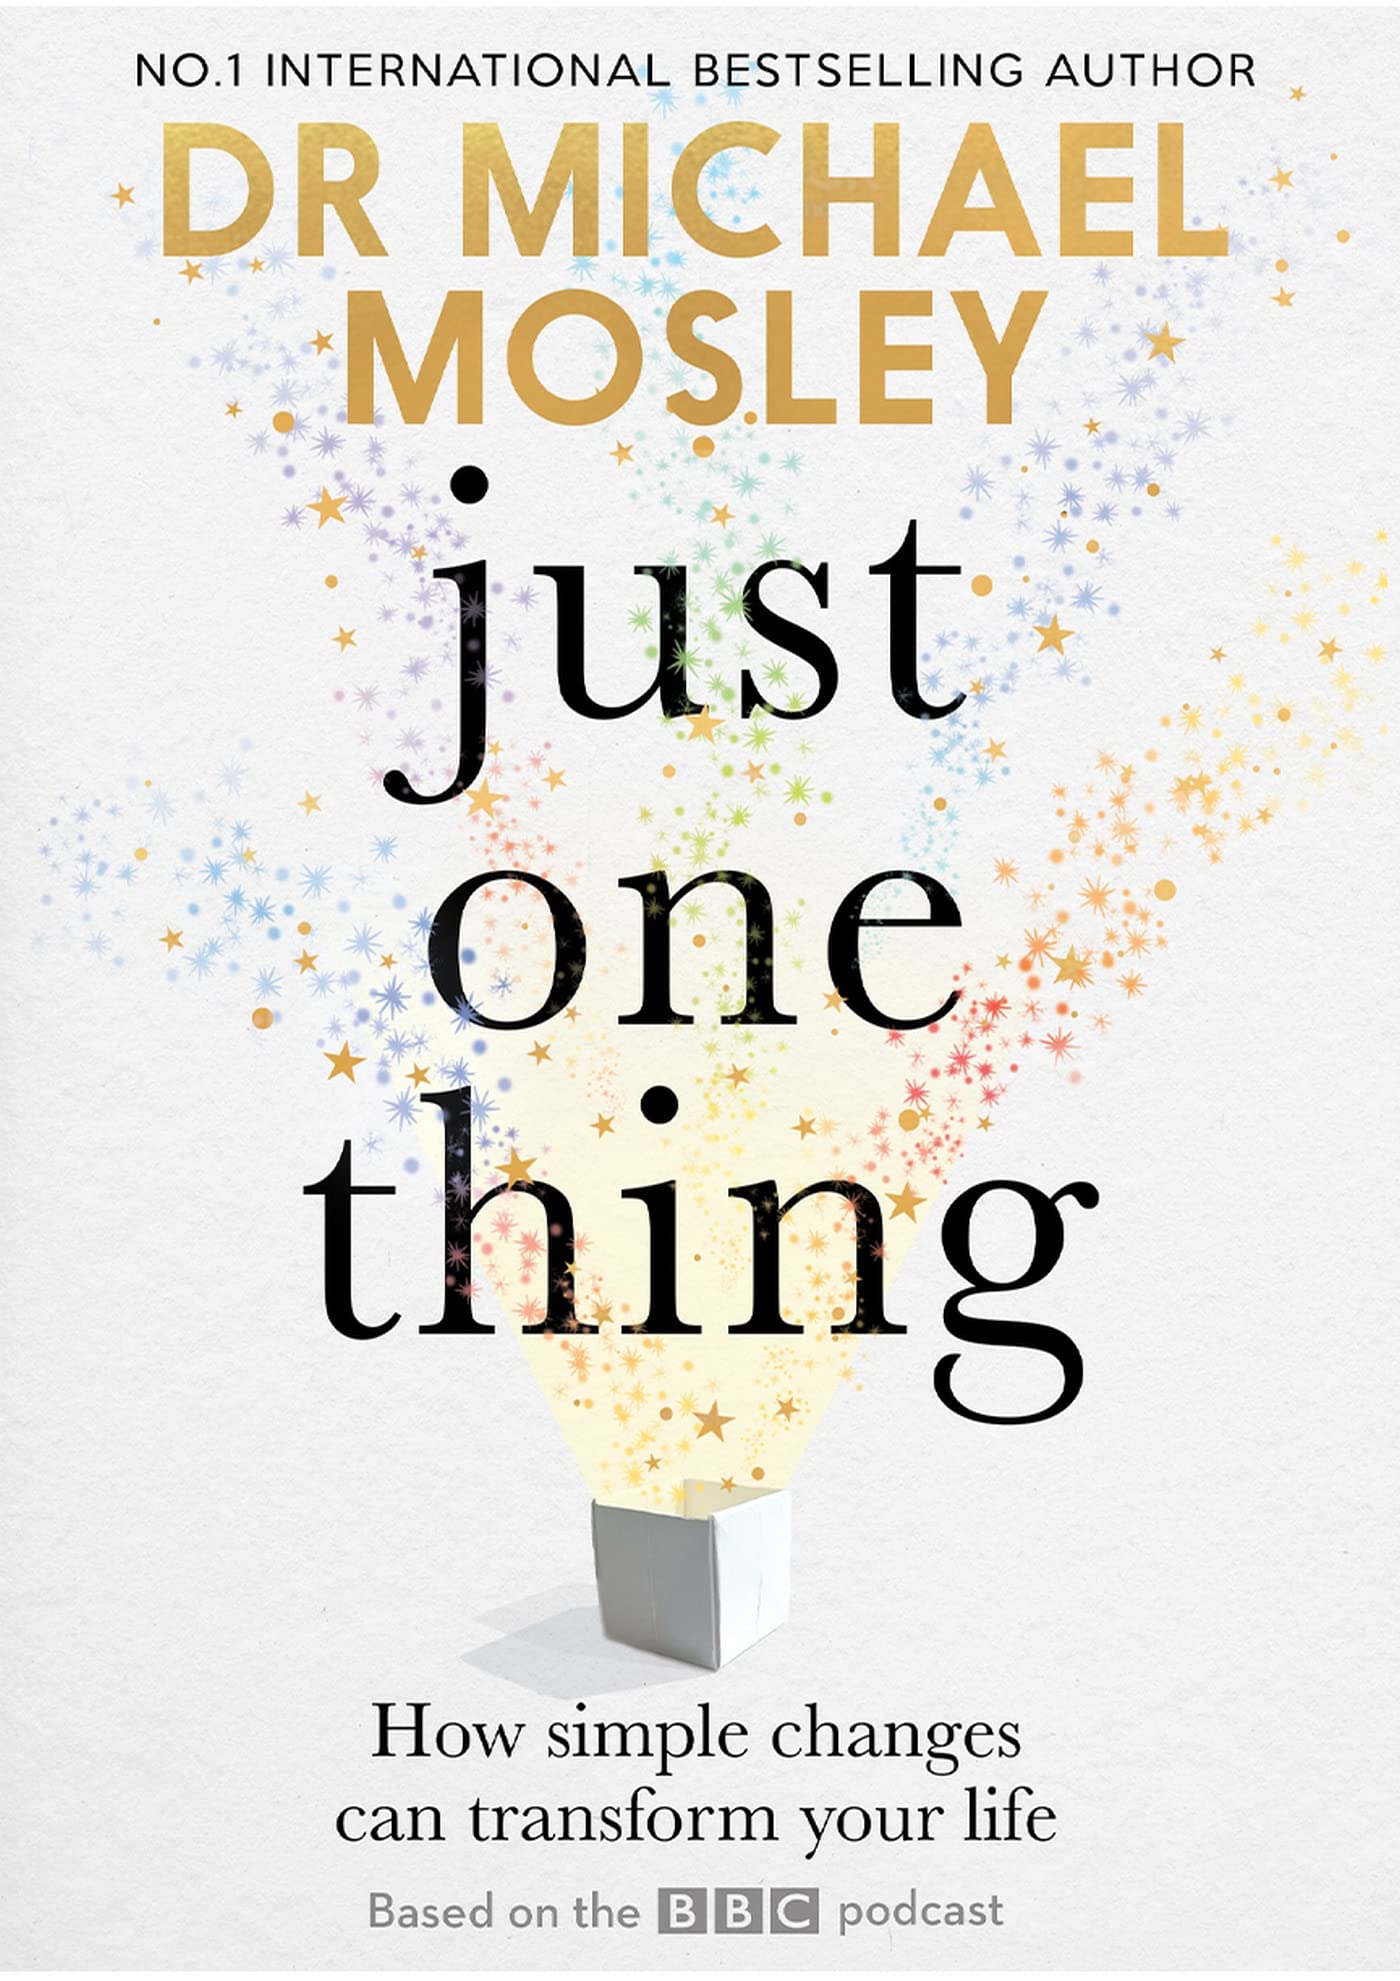 Just one thing by Michael Mosley